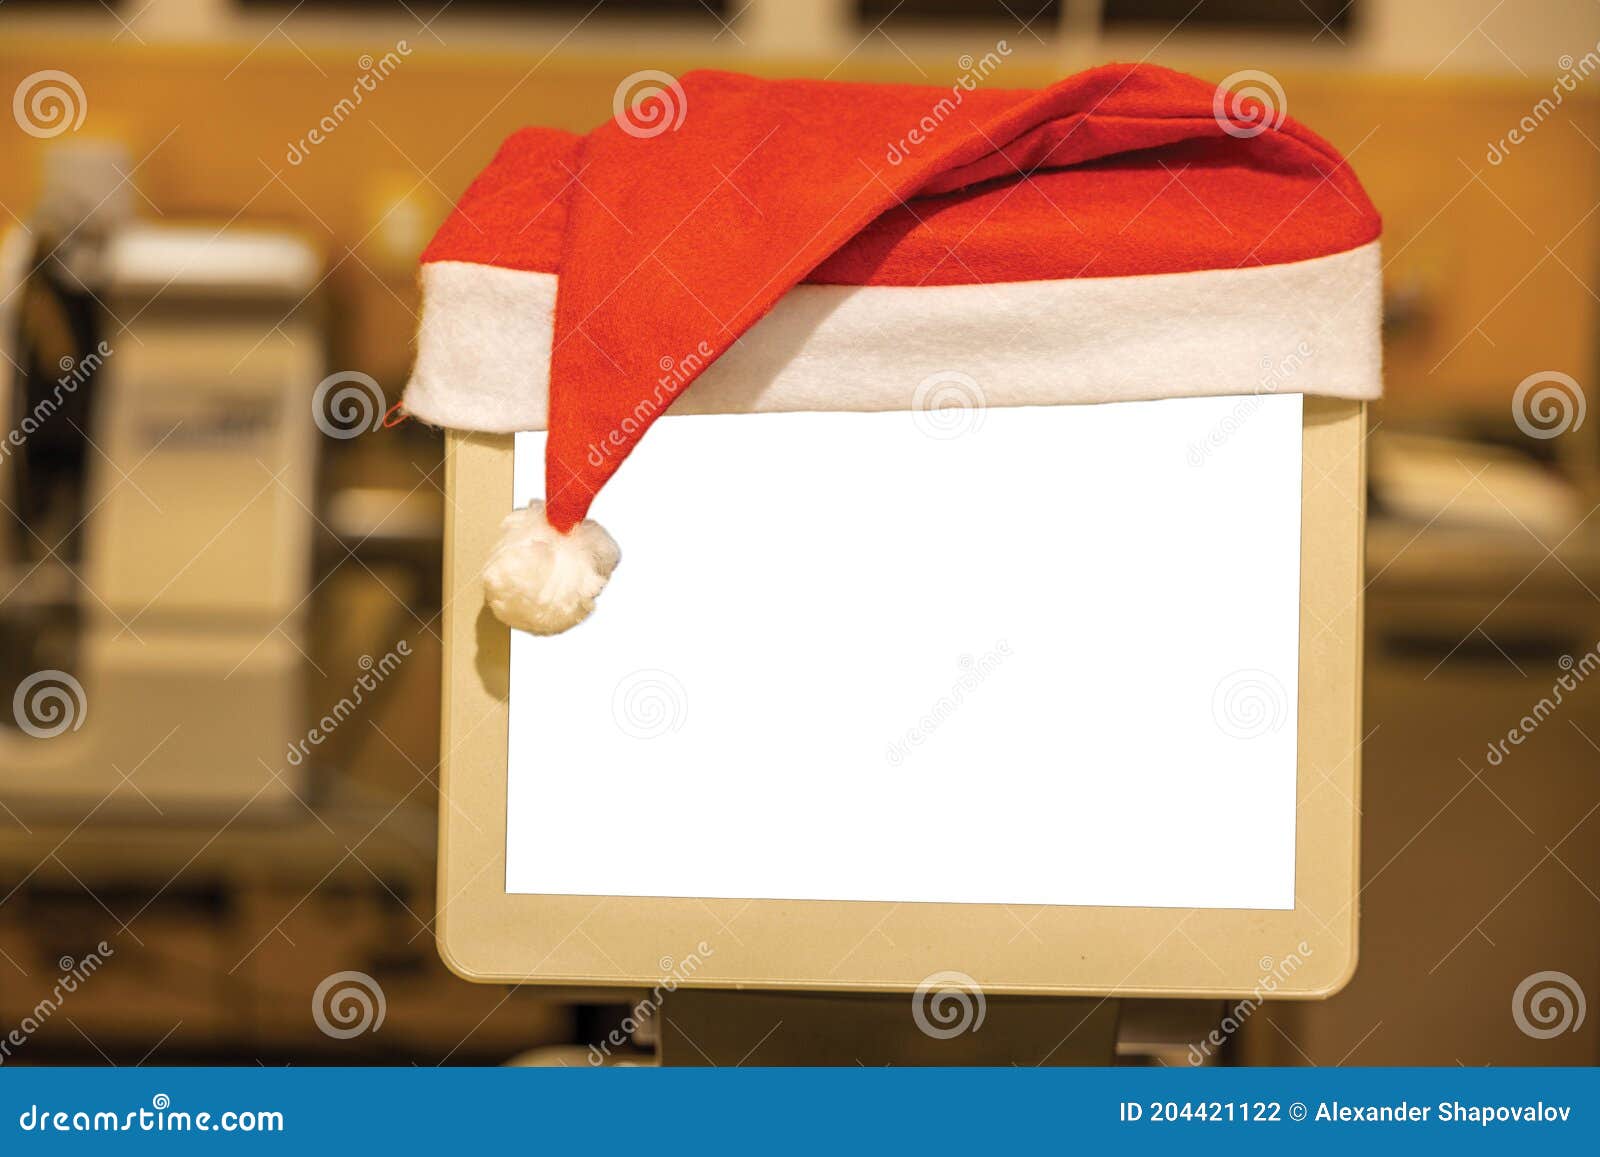 Download Close Up View Of Small White Mockup Image Blank Board With ...